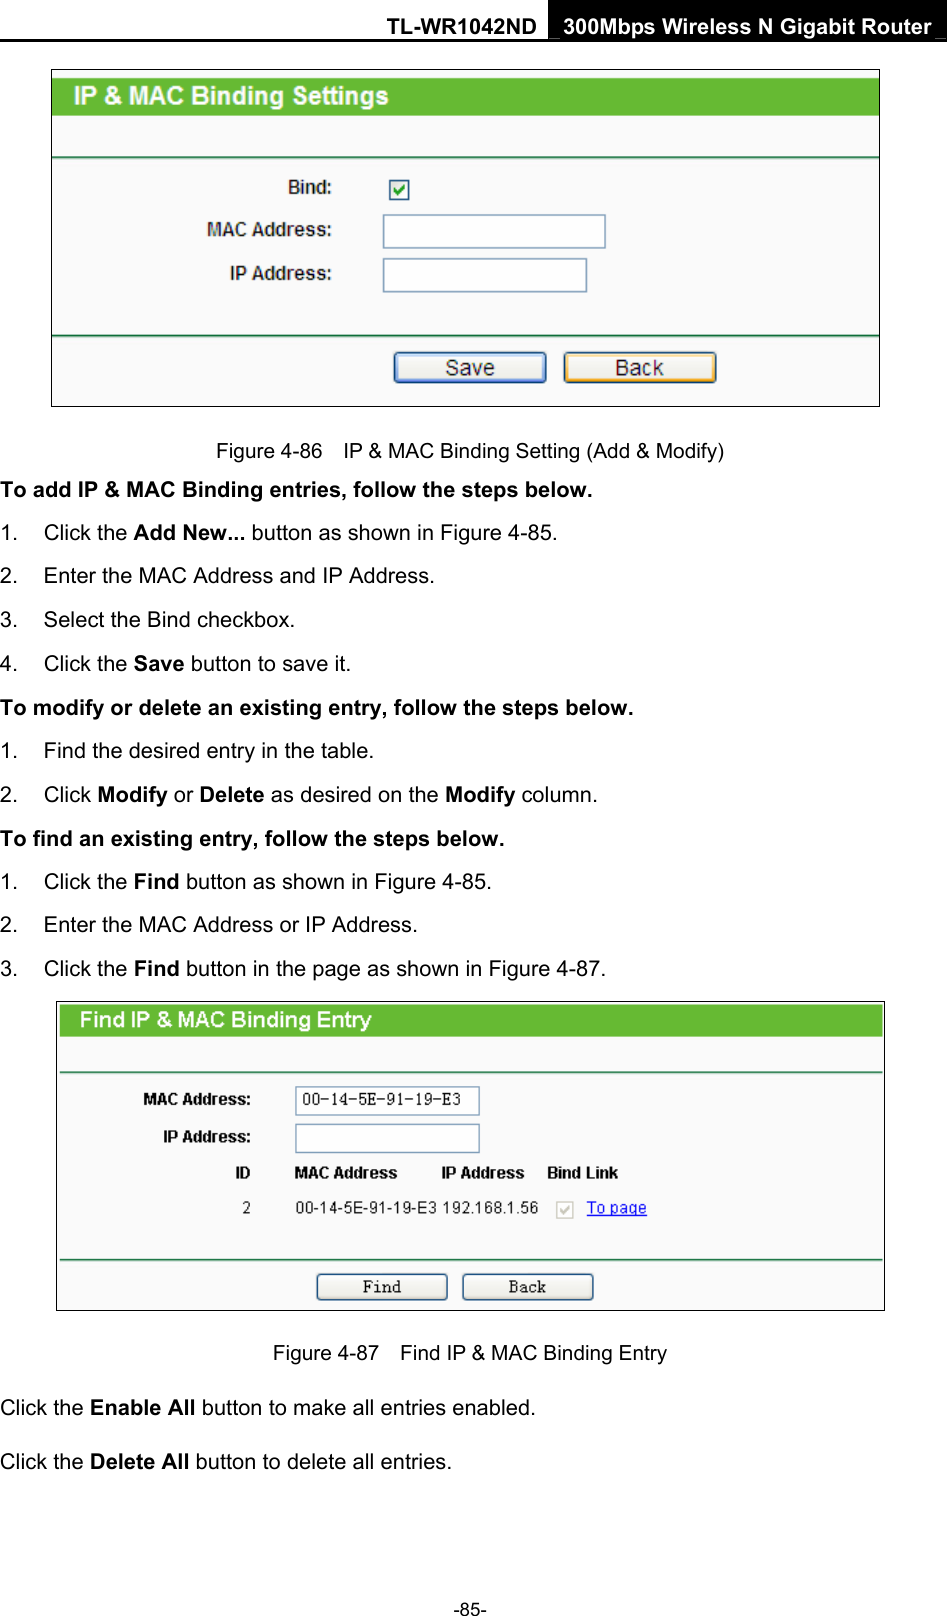 TL-WR1042ND 300Mbps Wireless N Gigabit Router -85-  Figure 4-86    IP &amp; MAC Binding Setting (Add &amp; Modify) To add IP &amp; MAC Binding entries, follow the steps below. 1. Click the Add New... button as shown in Figure 4-85.   2.  Enter the MAC Address and IP Address. 3.  Select the Bind checkbox.   4. Click the Save button to save it. To modify or delete an existing entry, follow the steps below. 1.  Find the desired entry in the table.   2. Click Modify or Delete as desired on the Modify column.   To find an existing entry, follow the steps below. 1. Click the Find button as shown in Figure 4-85. 2.  Enter the MAC Address or IP Address. 3. Click the Find button in the page as shown in Figure 4-87.  Figure 4-87    Find IP &amp; MAC Binding Entry Click the Enable All button to make all entries enabled. Click the Delete All button to delete all entries. 